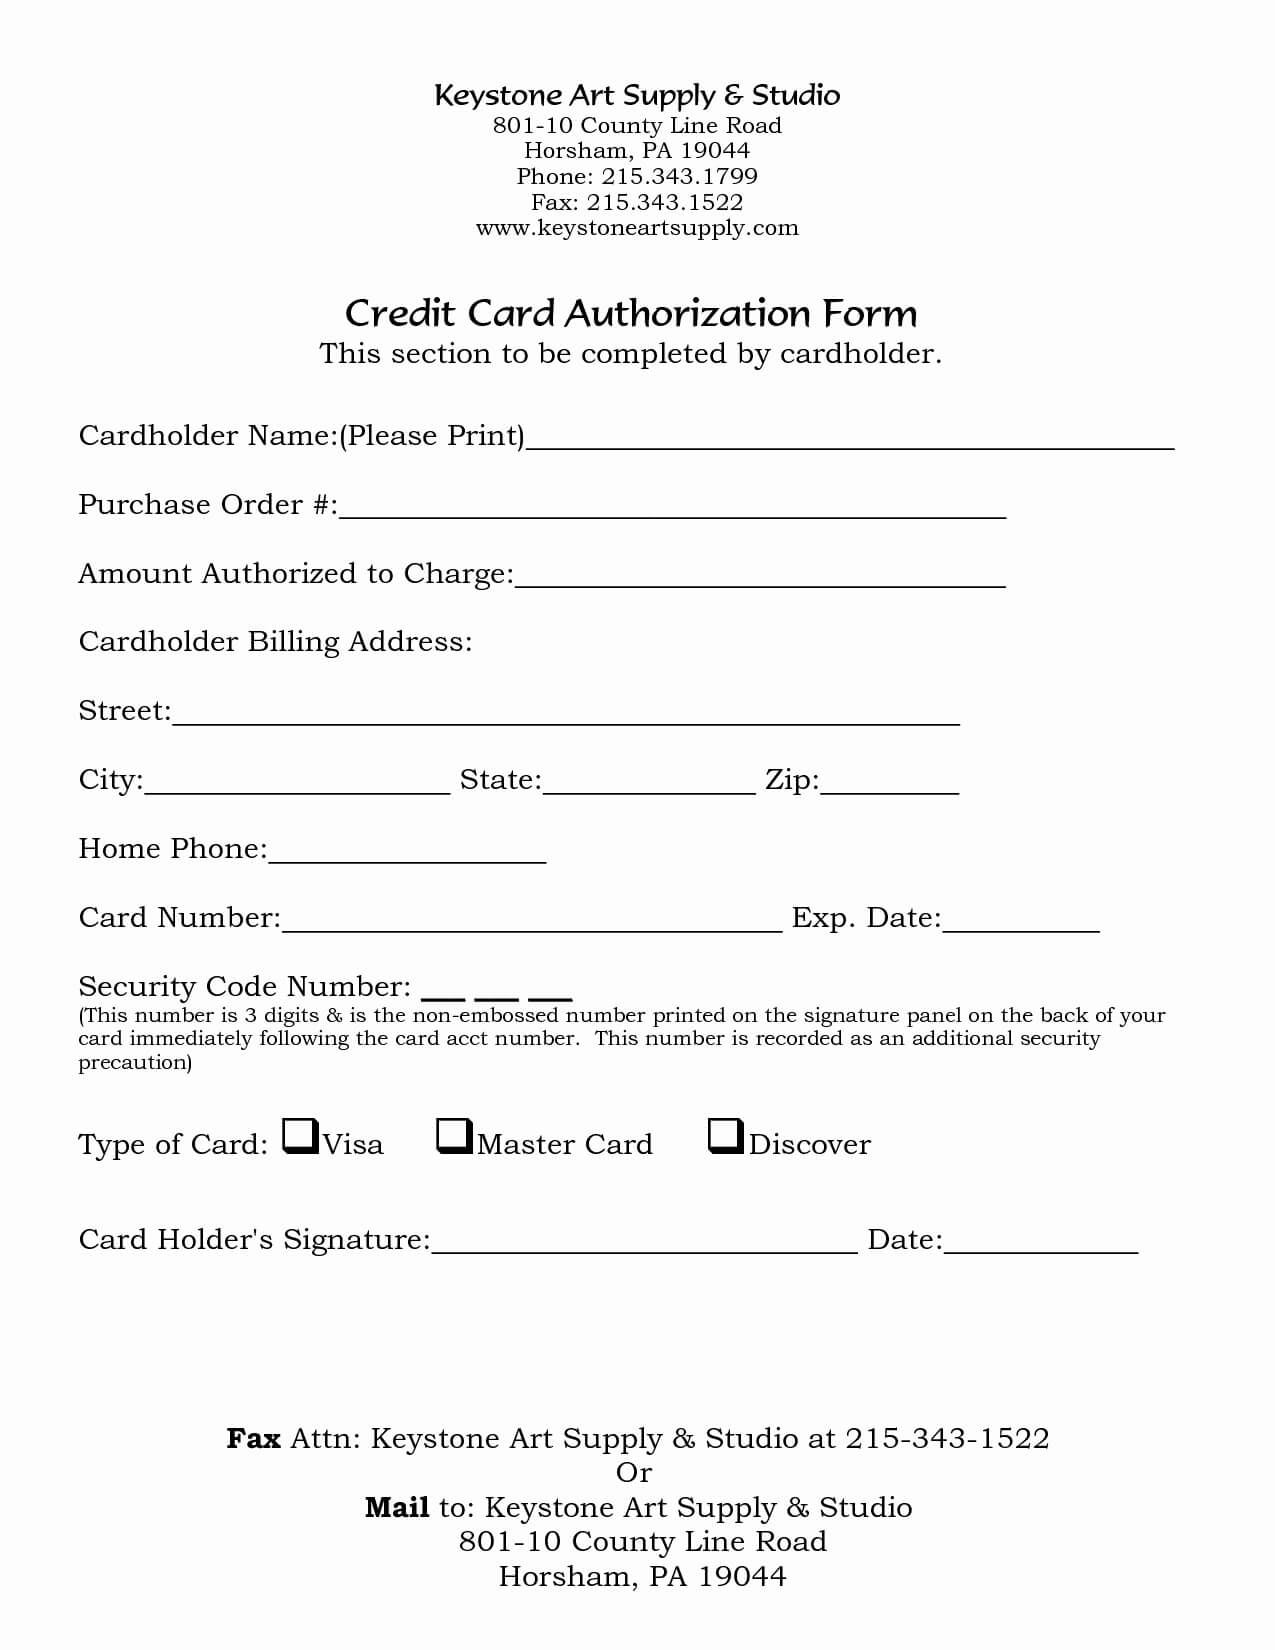 Credit Card Payment Form Federal Circuit Court Of Australia With Regard To Credit Card Billing Authorization Form Template